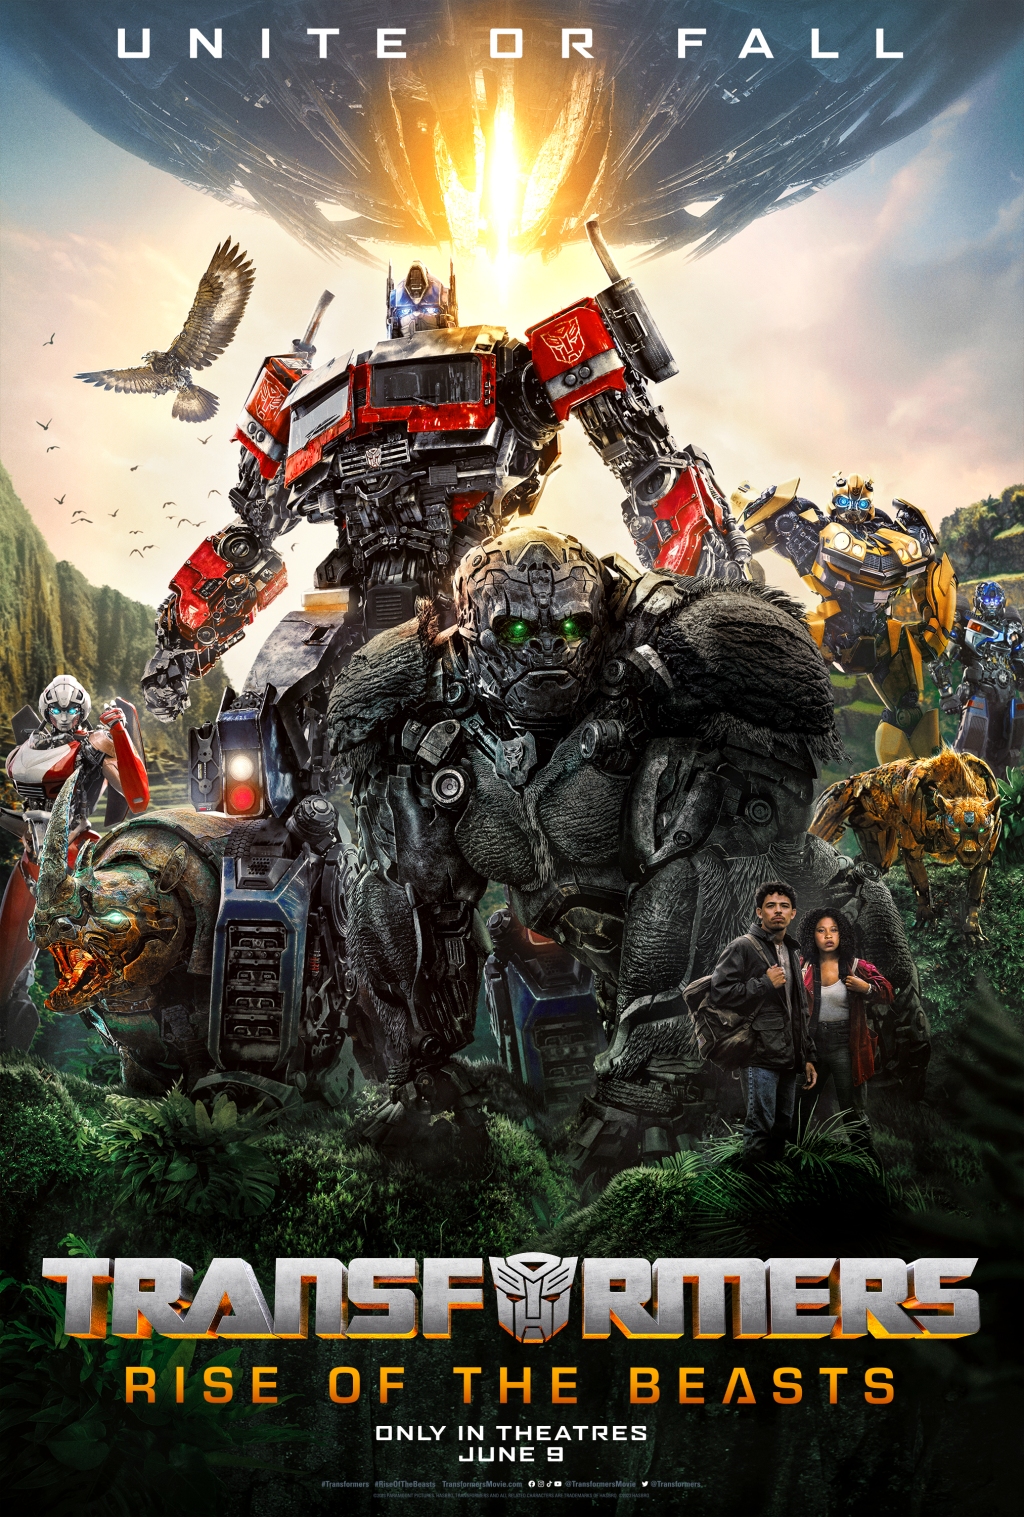 Bom tấn "Transformers: Rise of the Beasts" Transformers-rise-of-the-beasts-poster-1682889880258491490992-1682997028252-16829970283481433945962-1683004298953-1683004299079179575981